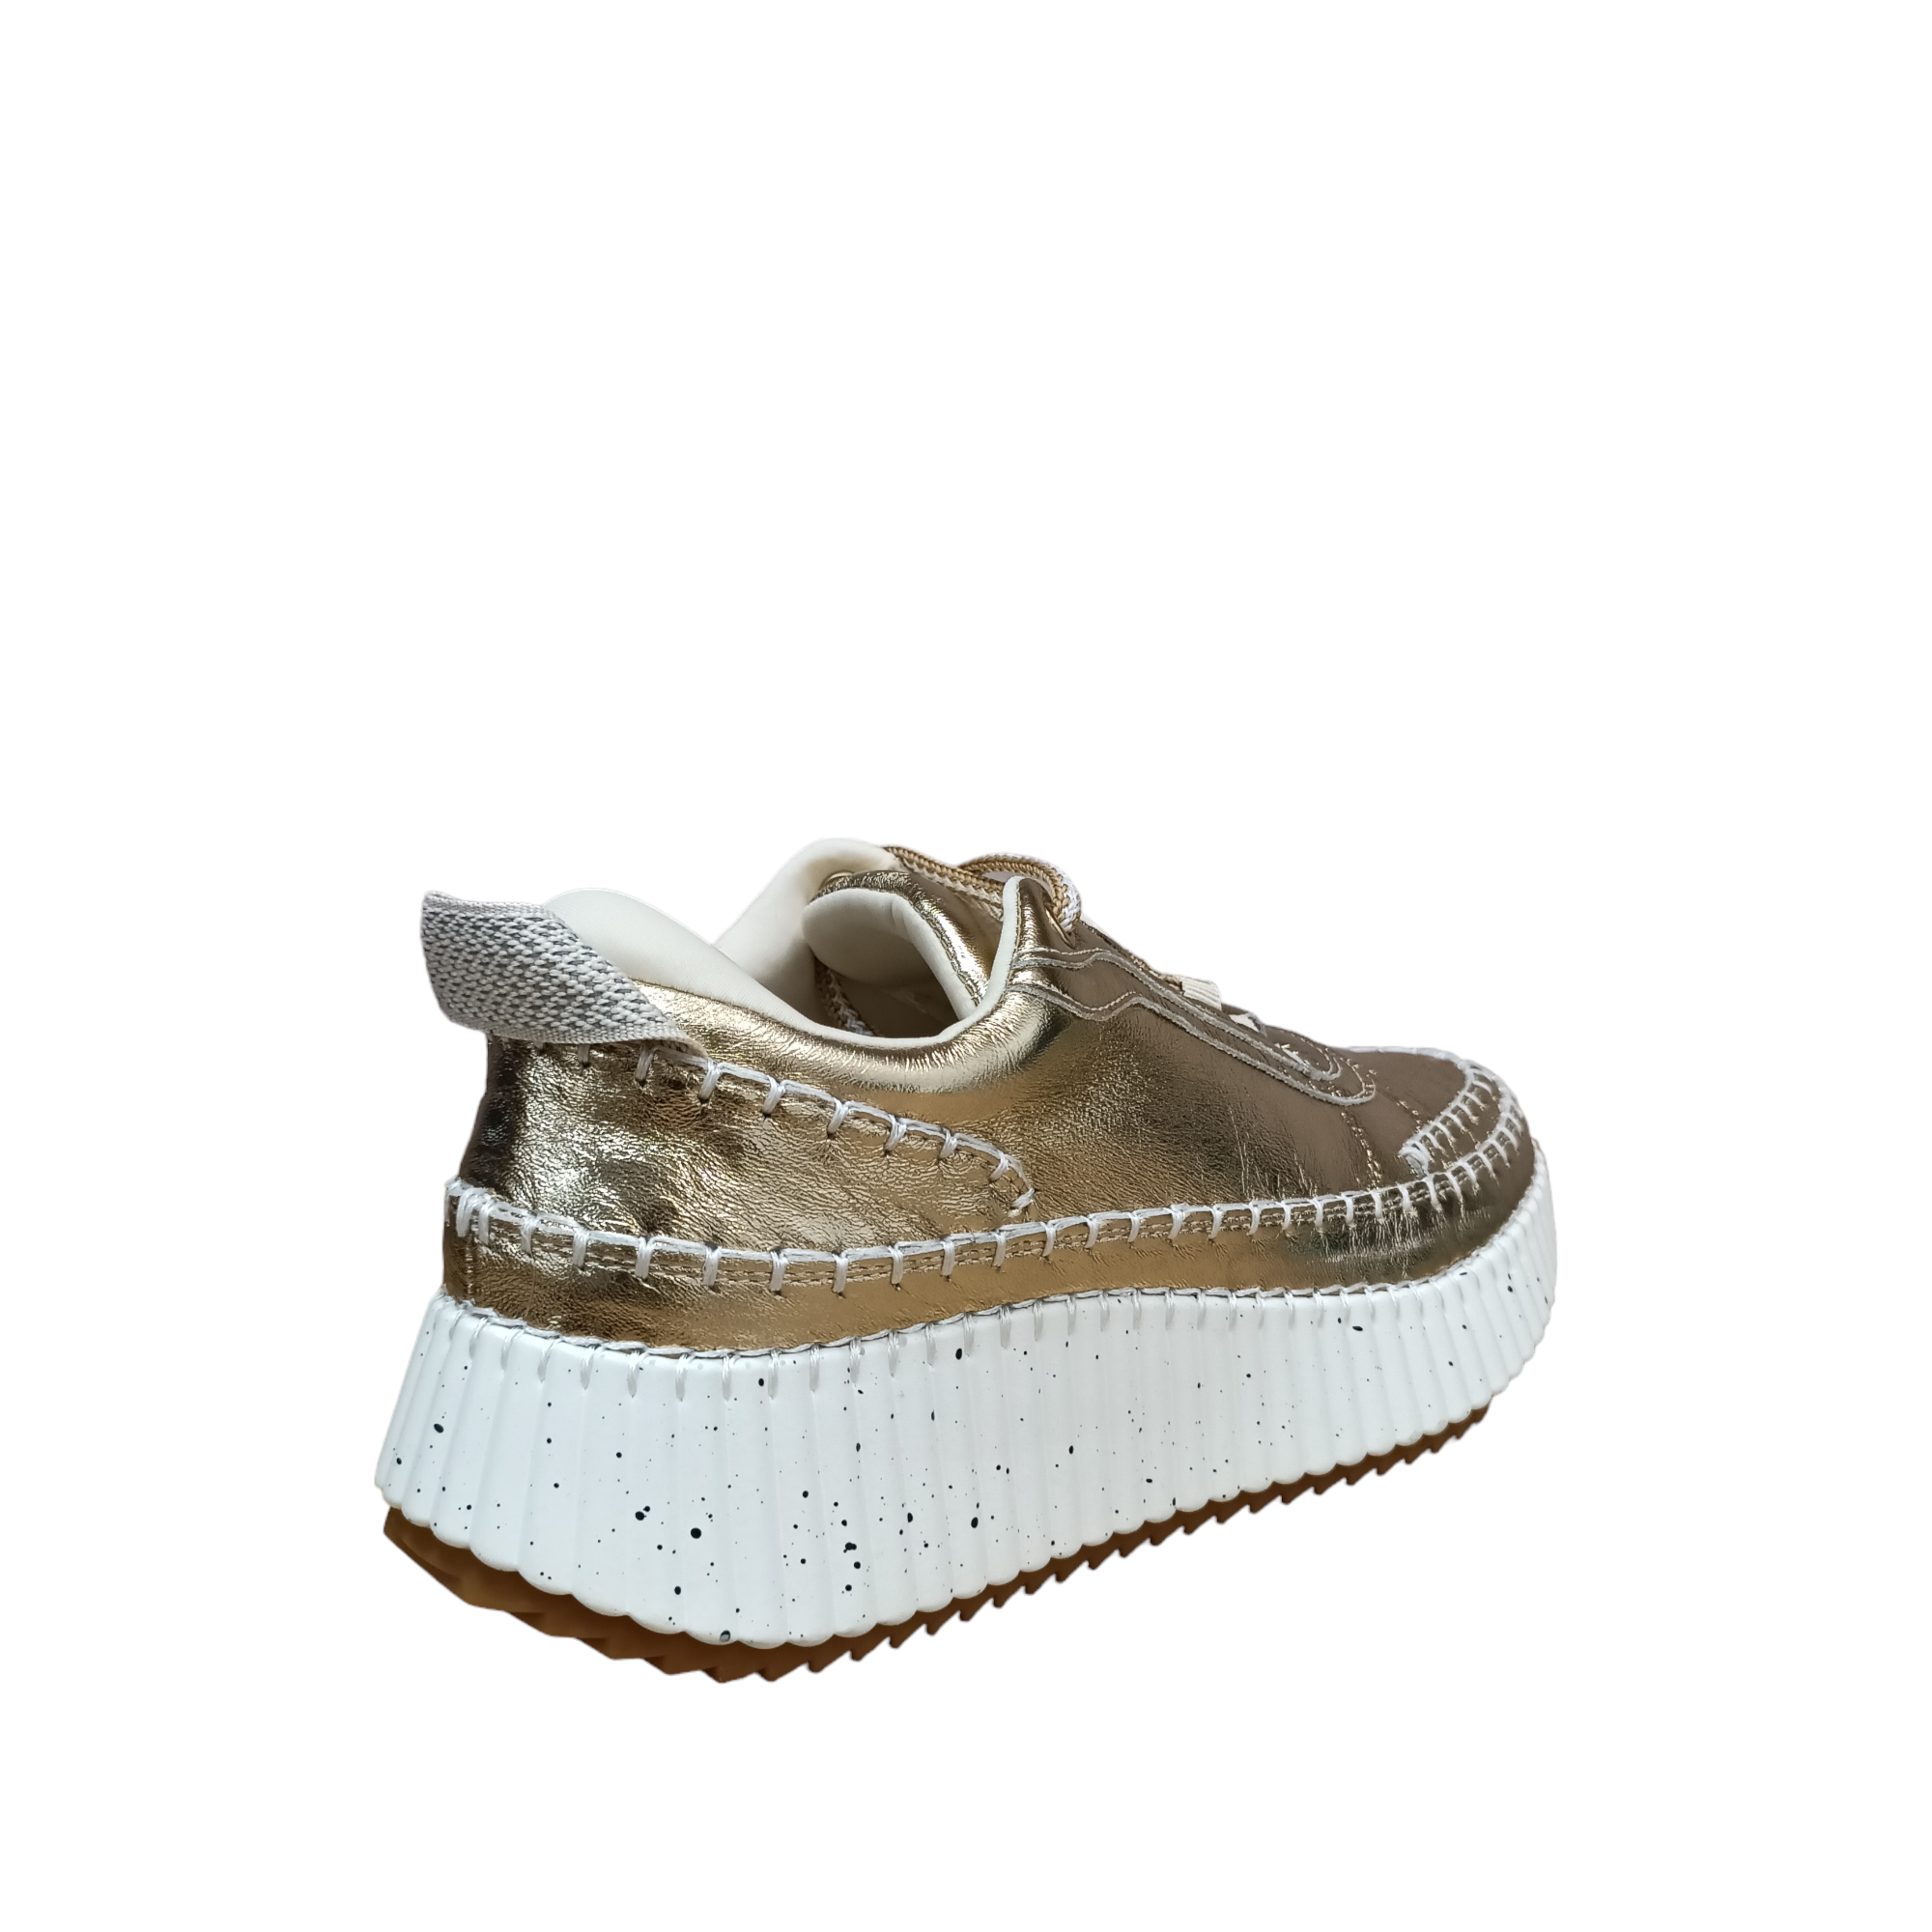 Back view of a bright gold Gelato sneaker with a white speckled sole. White bright stitching joining the upper with the botton part of the shoe. shop womens winter sneakers shoe&amp;me NZ